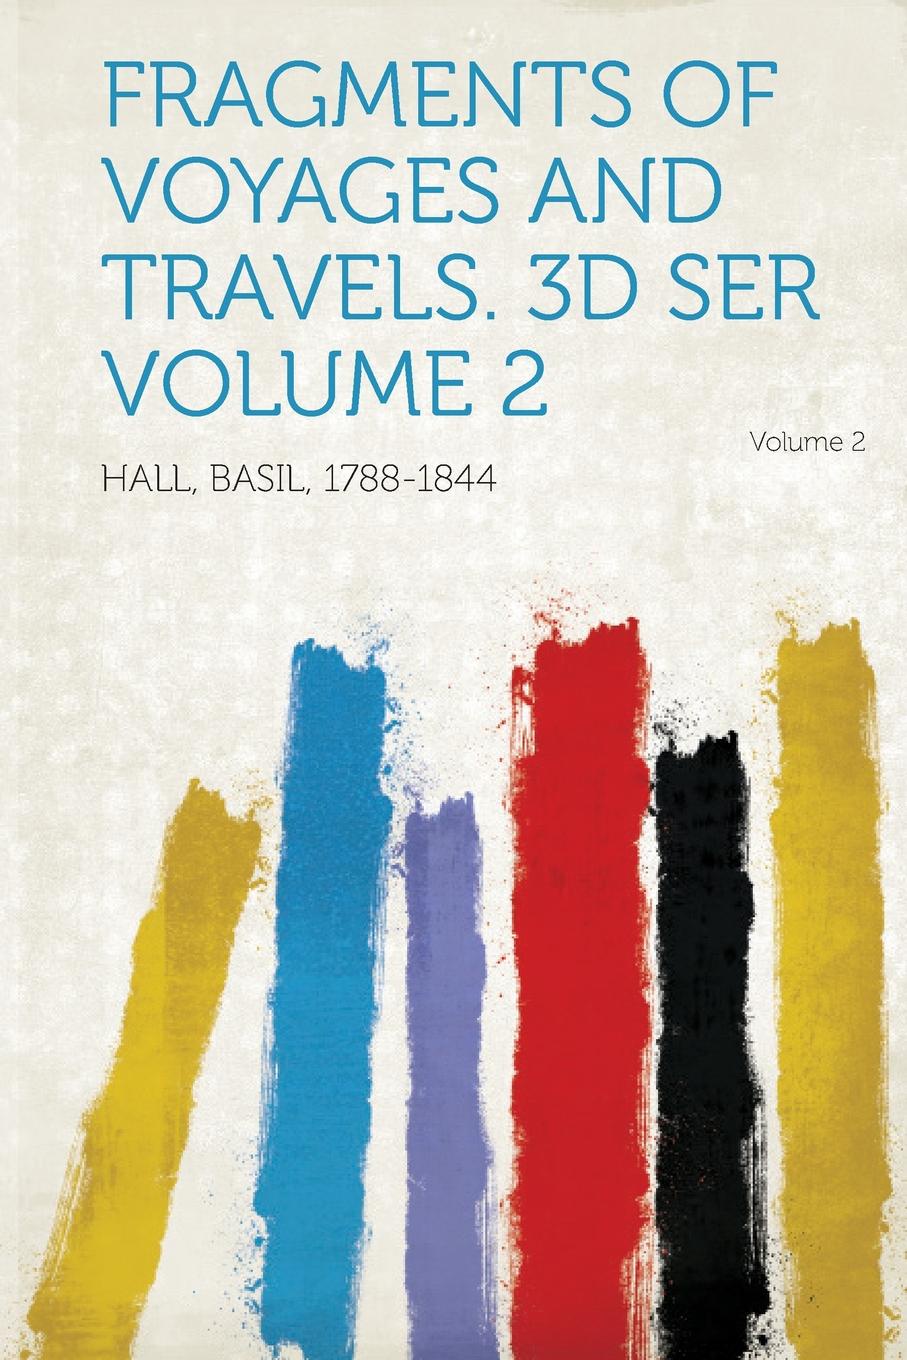 Fragments of Voyages and Travels. 3D Ser